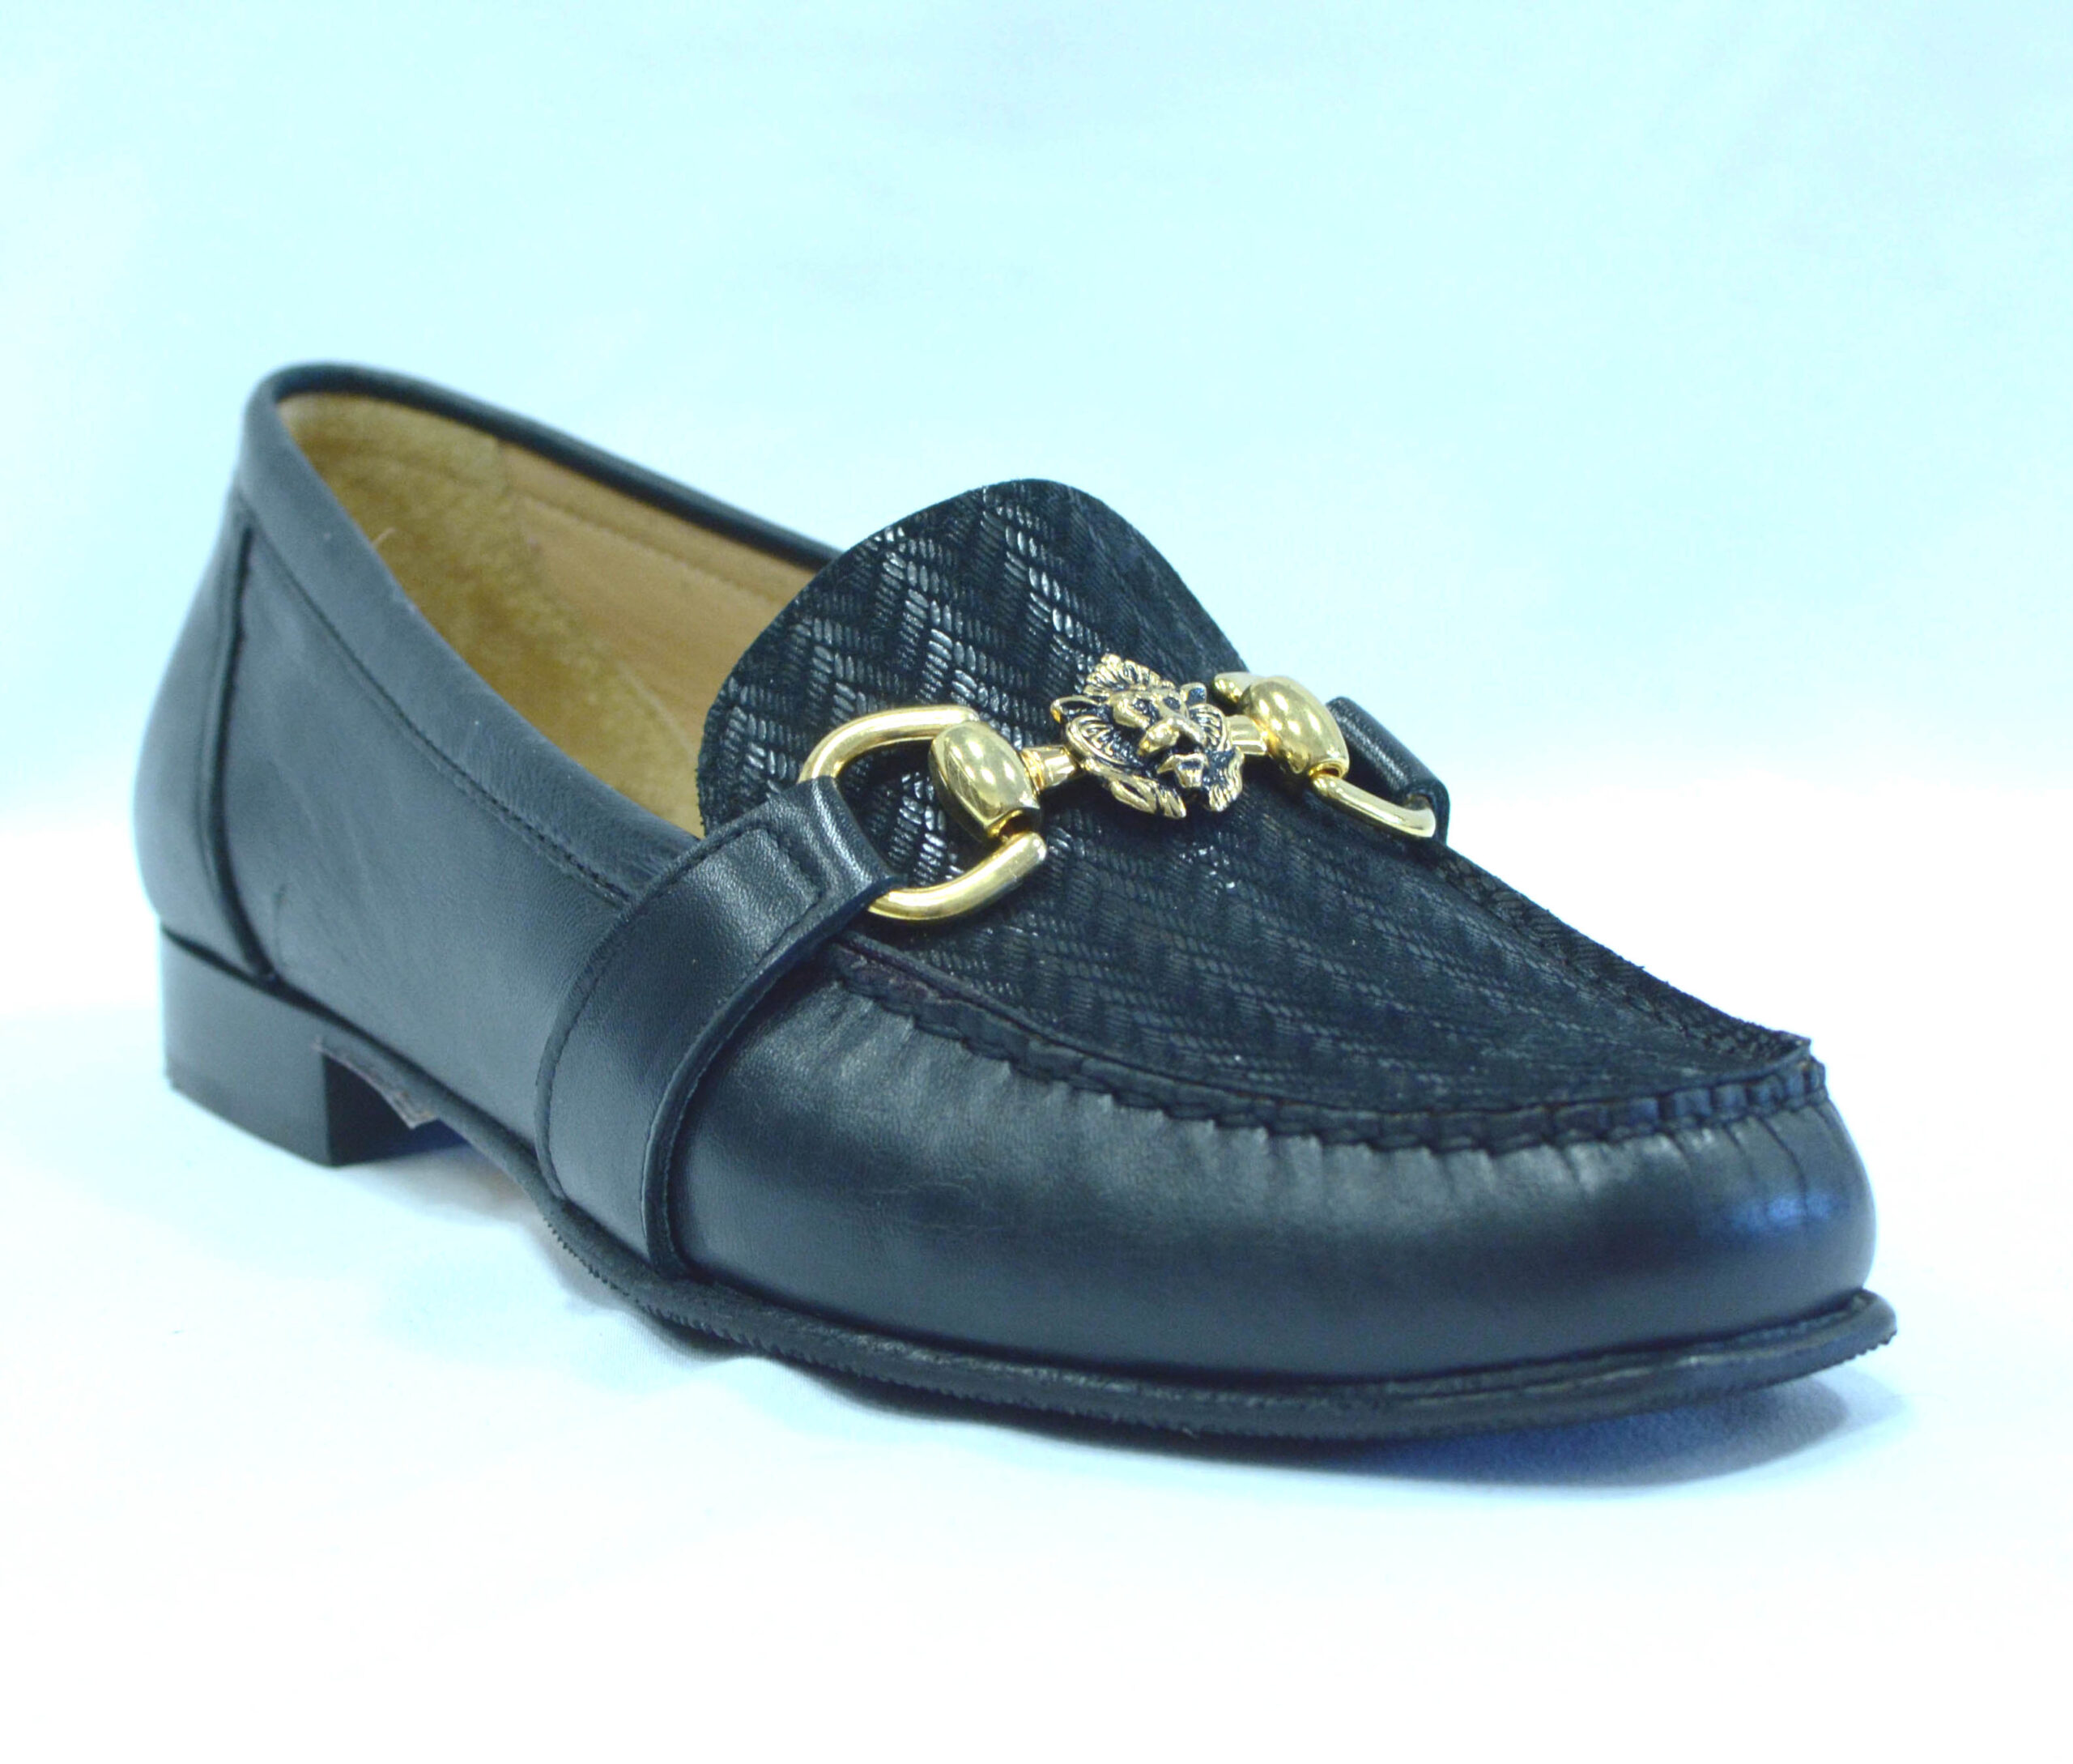 moccasin dress shoes